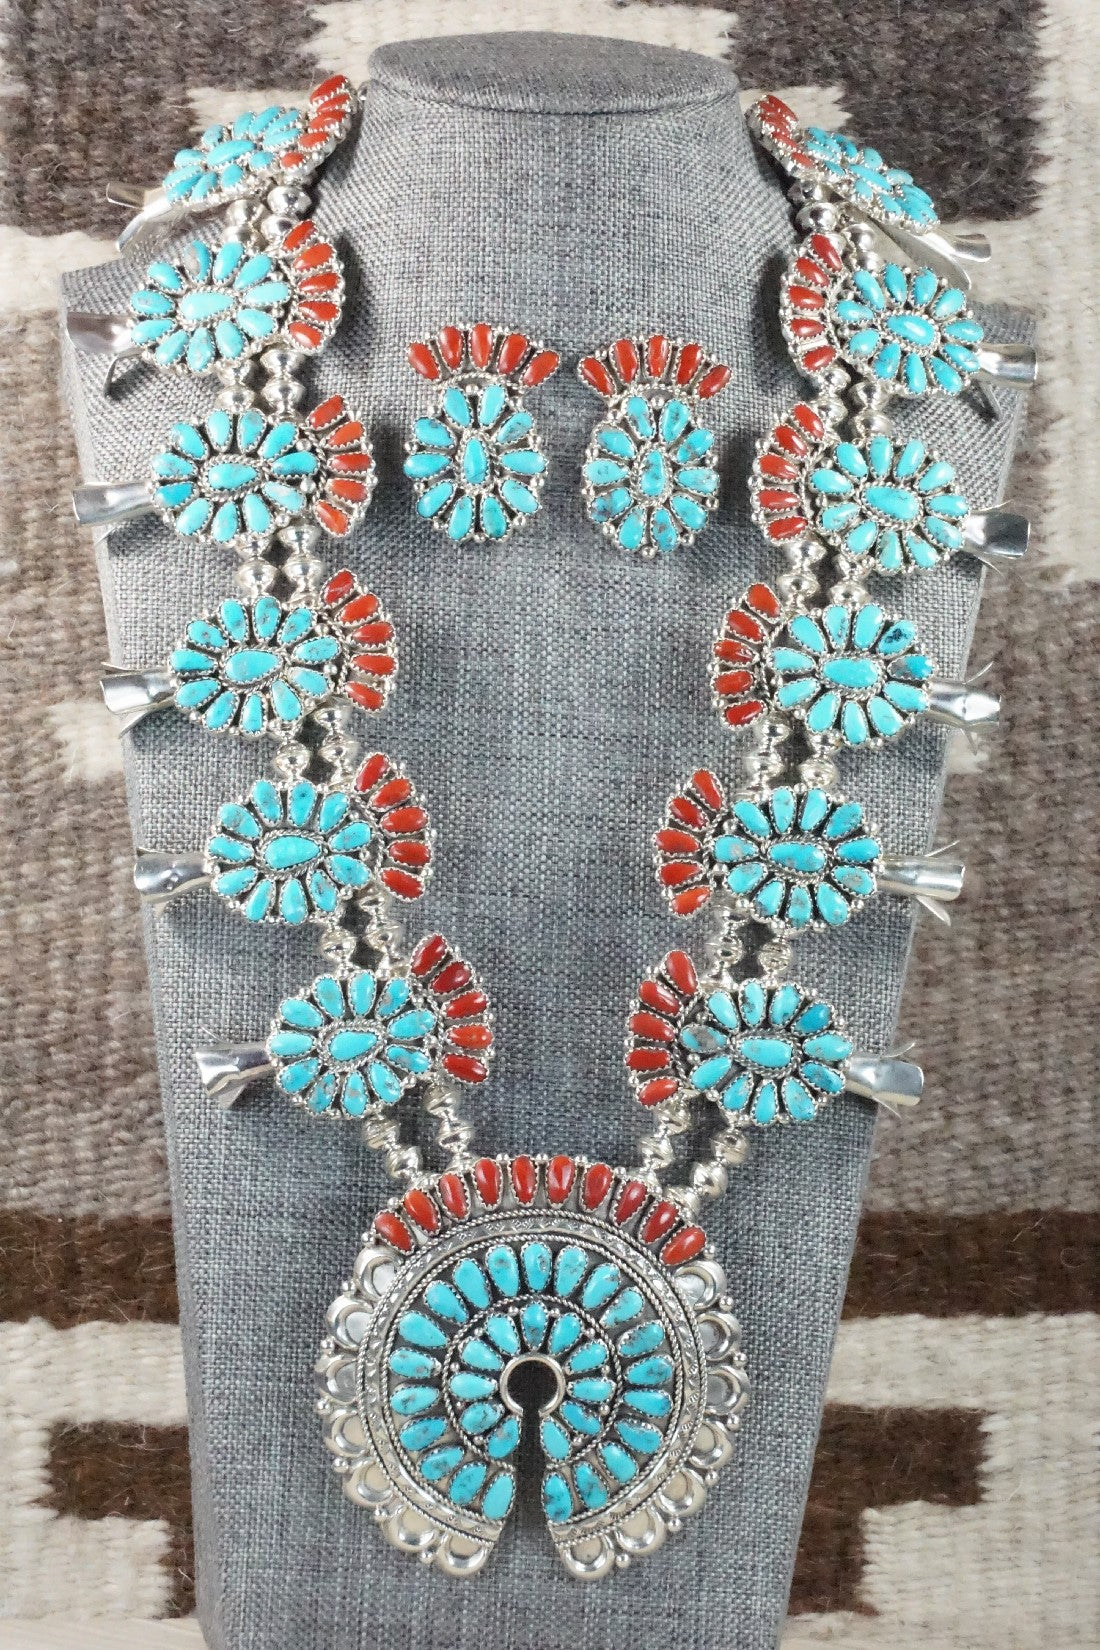 Natural Turquoise Squash Blossom Necklace – Branded Country Wear